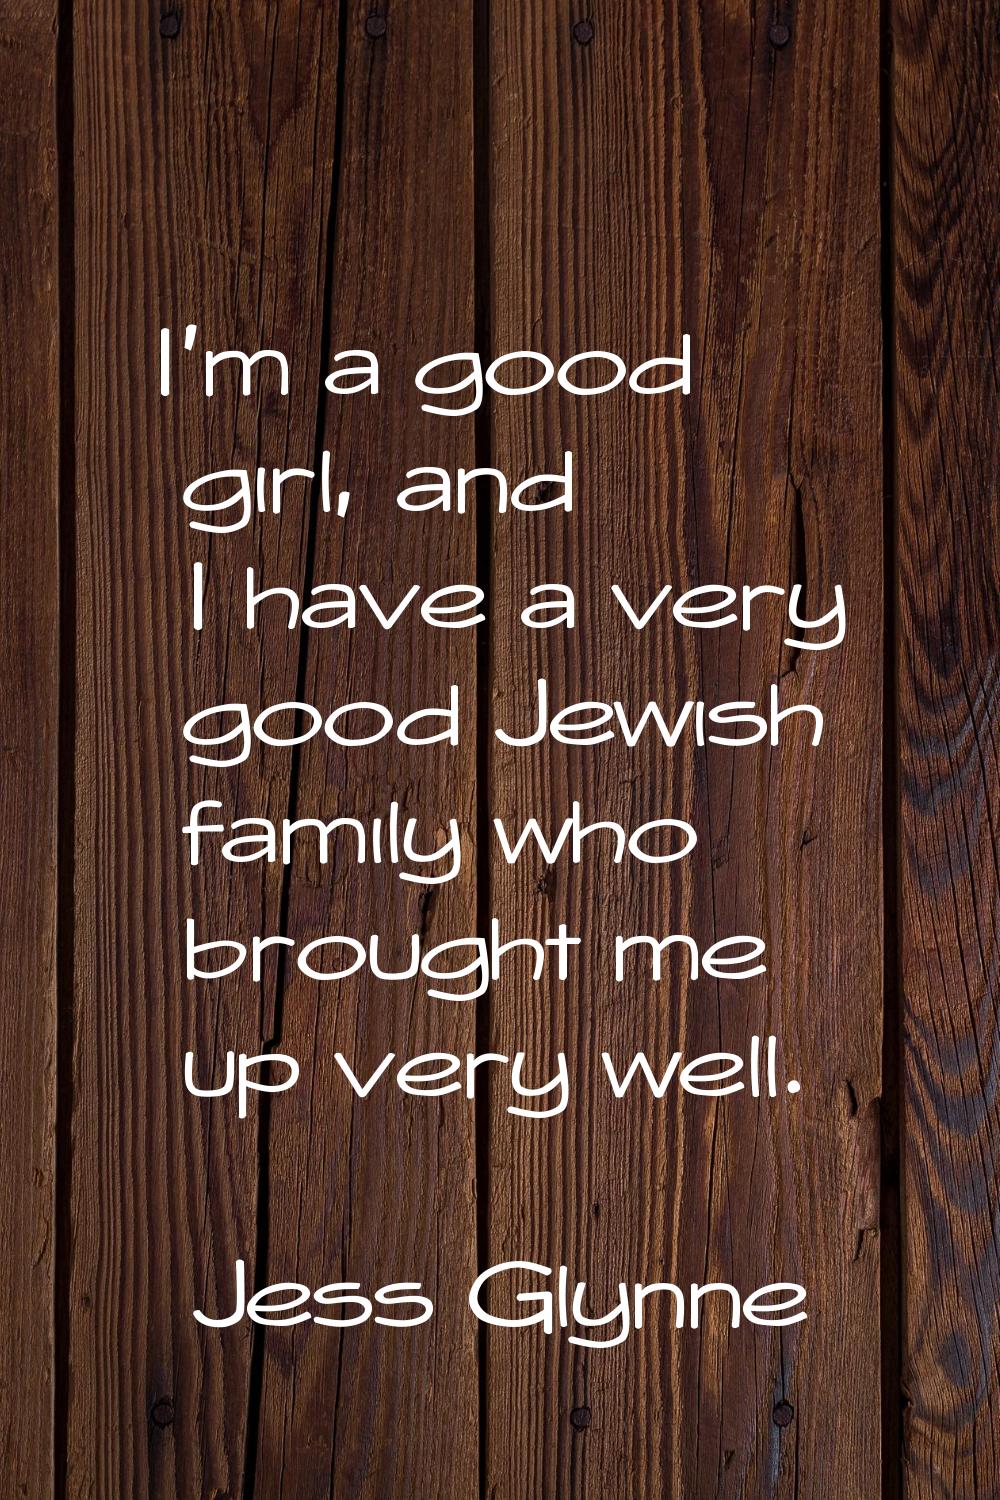 I'm a good girl, and I have a very good Jewish family who brought me up very well.